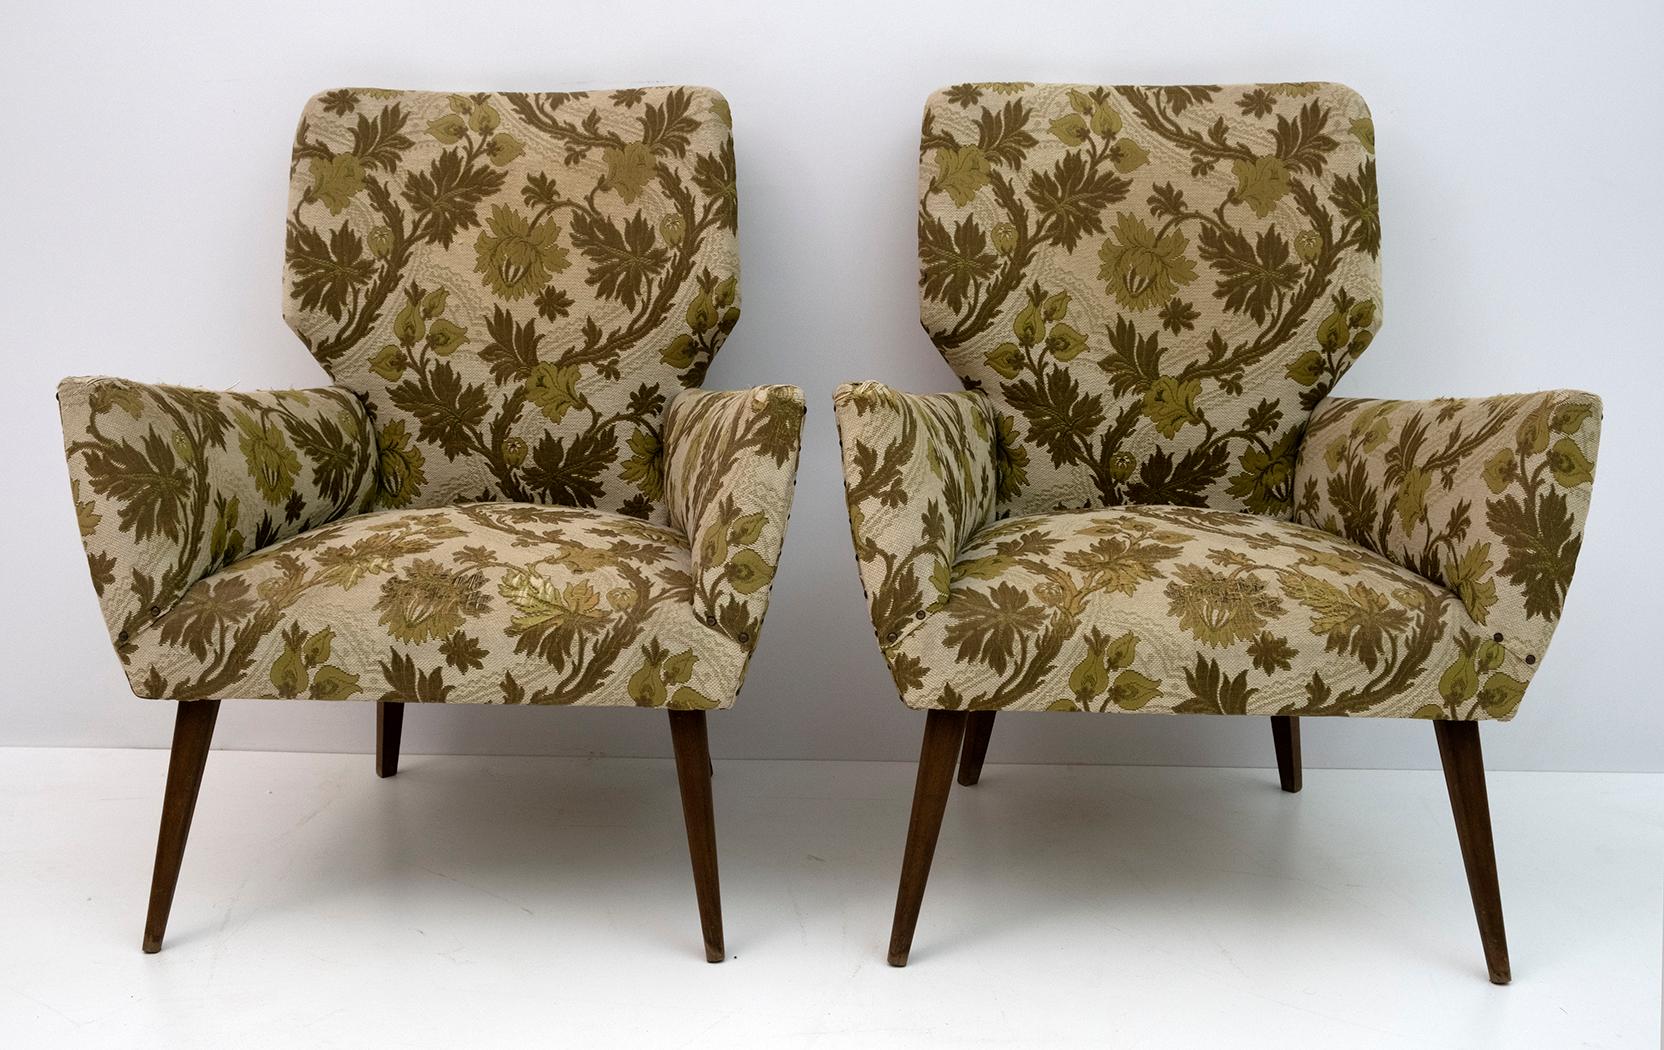 Pair of armchairs, Italian production of the 1950s, in the style of Gio Ponti, the armchairs need a new upholstery, as you can see from the photos it is worn by the use of time.
Also available the sofa measuring cm:
H84 x W165 x D62 x S38.